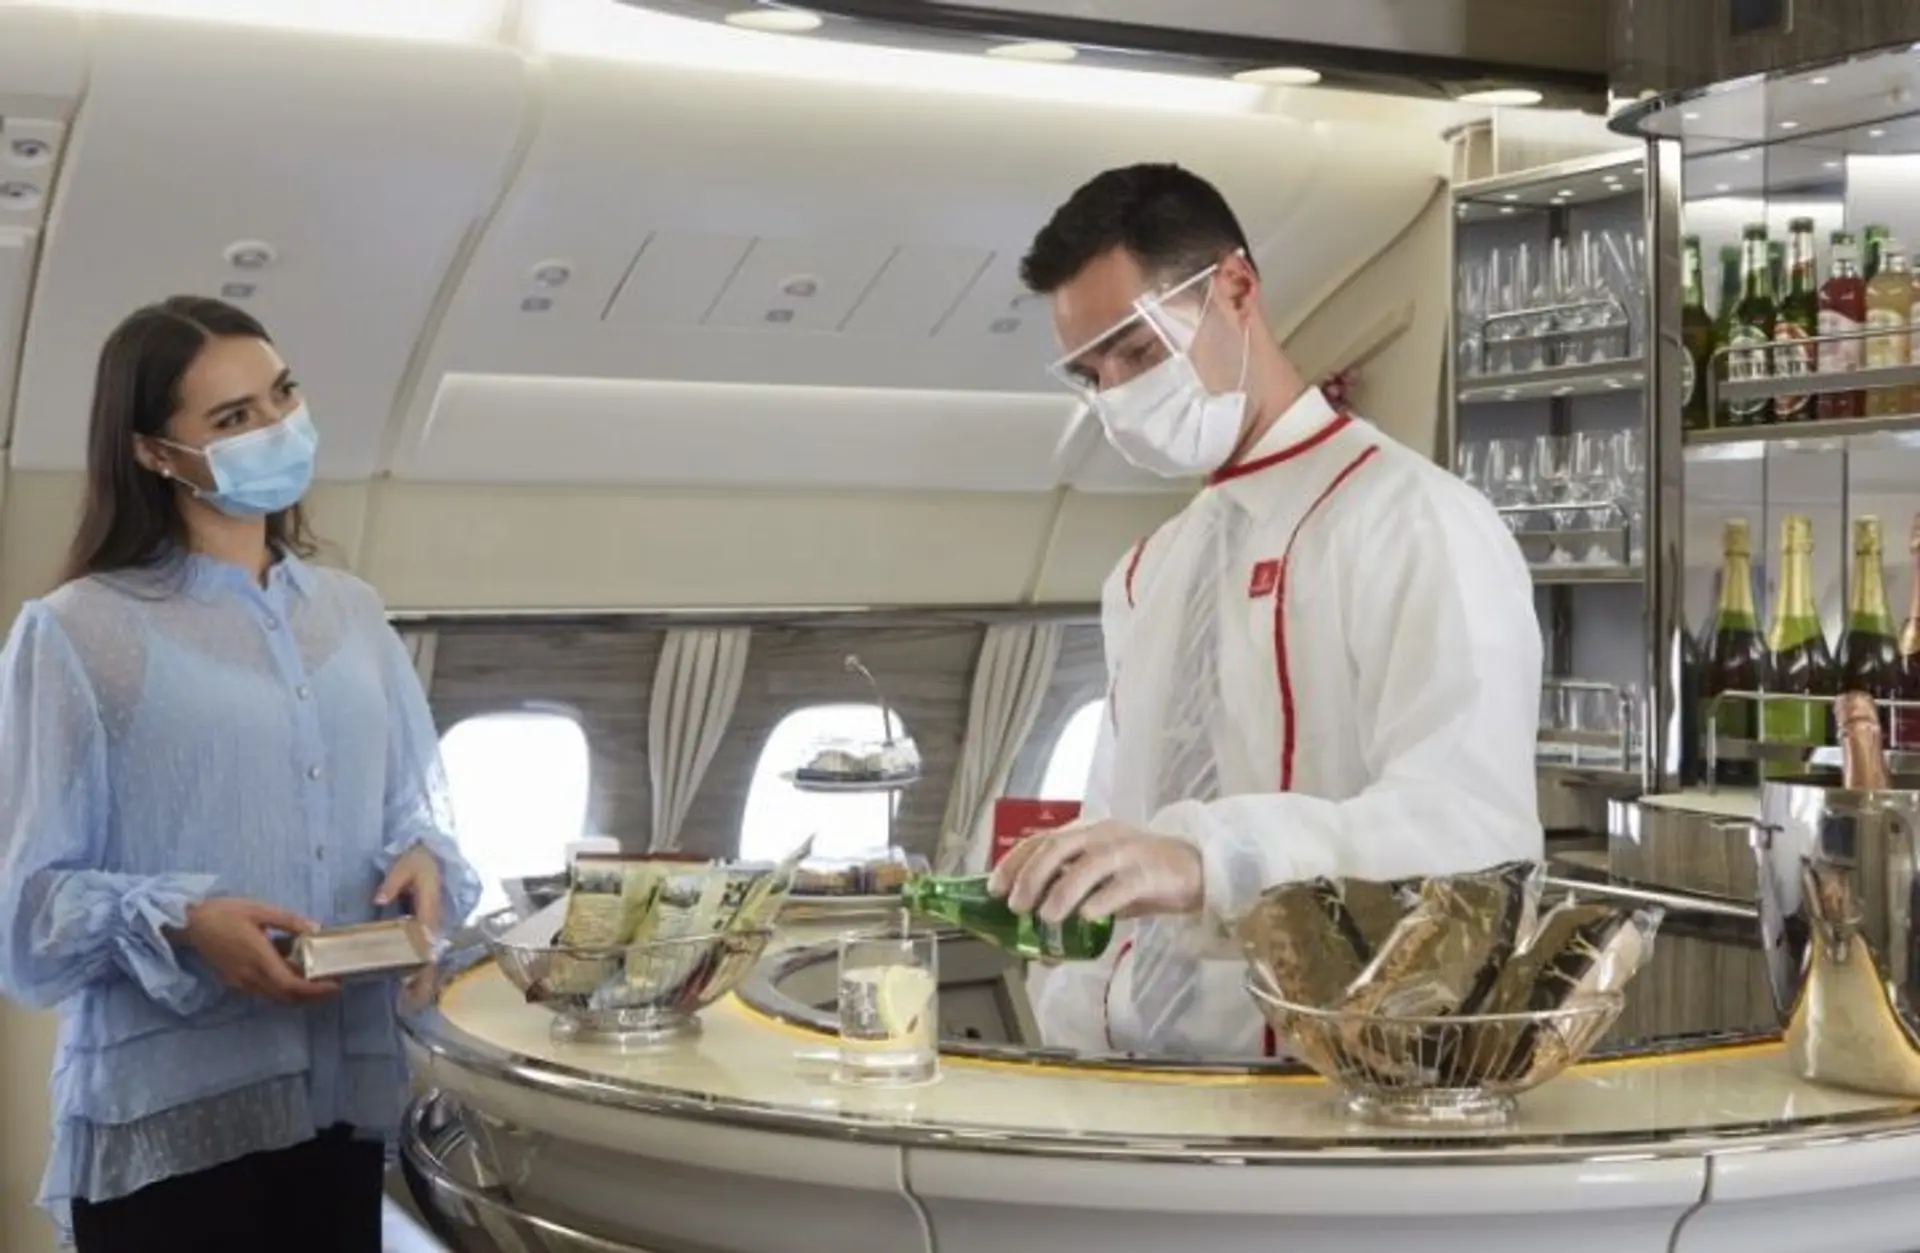 Airlines News - Emirates is resuming its iconic lounge and shower spa onboard the A380